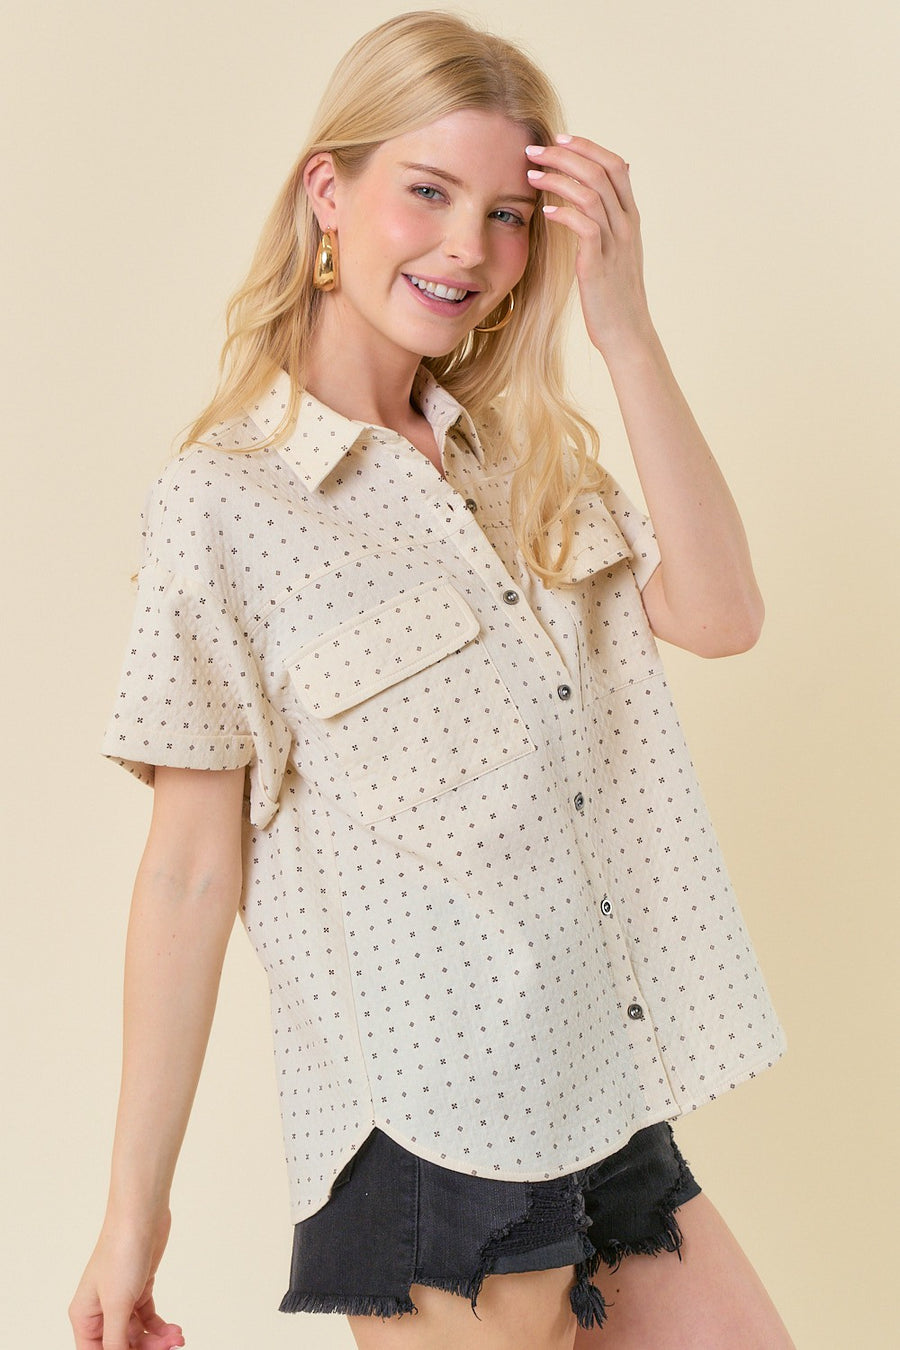 Whimsy Chic Top.